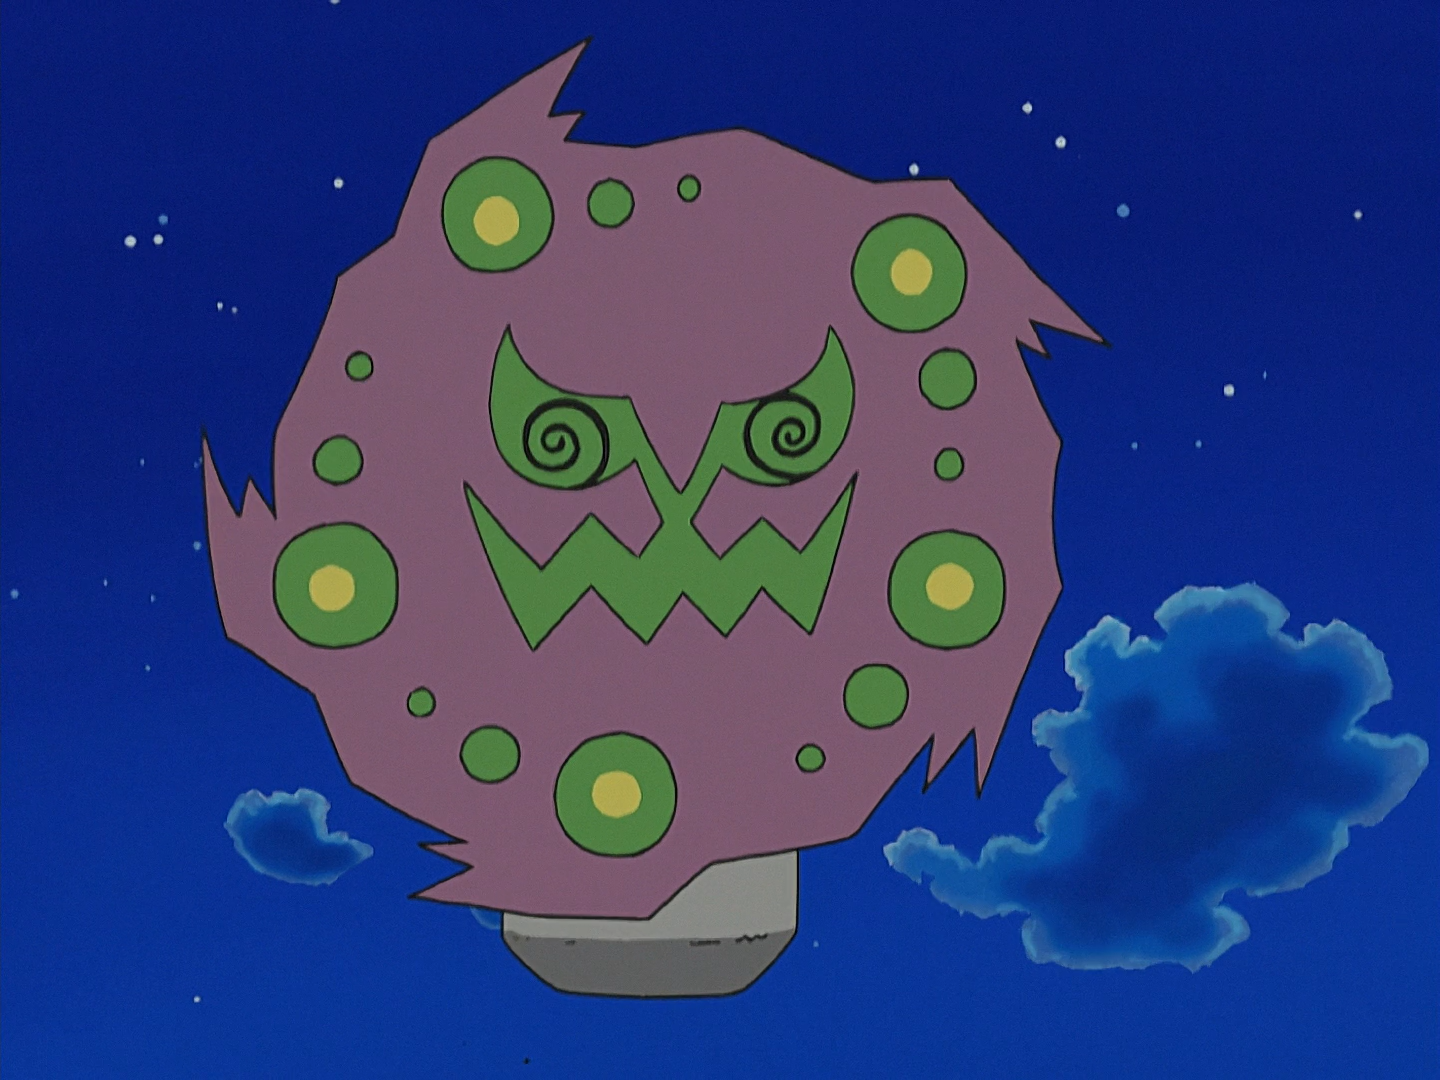 How SPECTACULAR is Spiritomb in Pokemon Sweltering Sun ACTUALLY